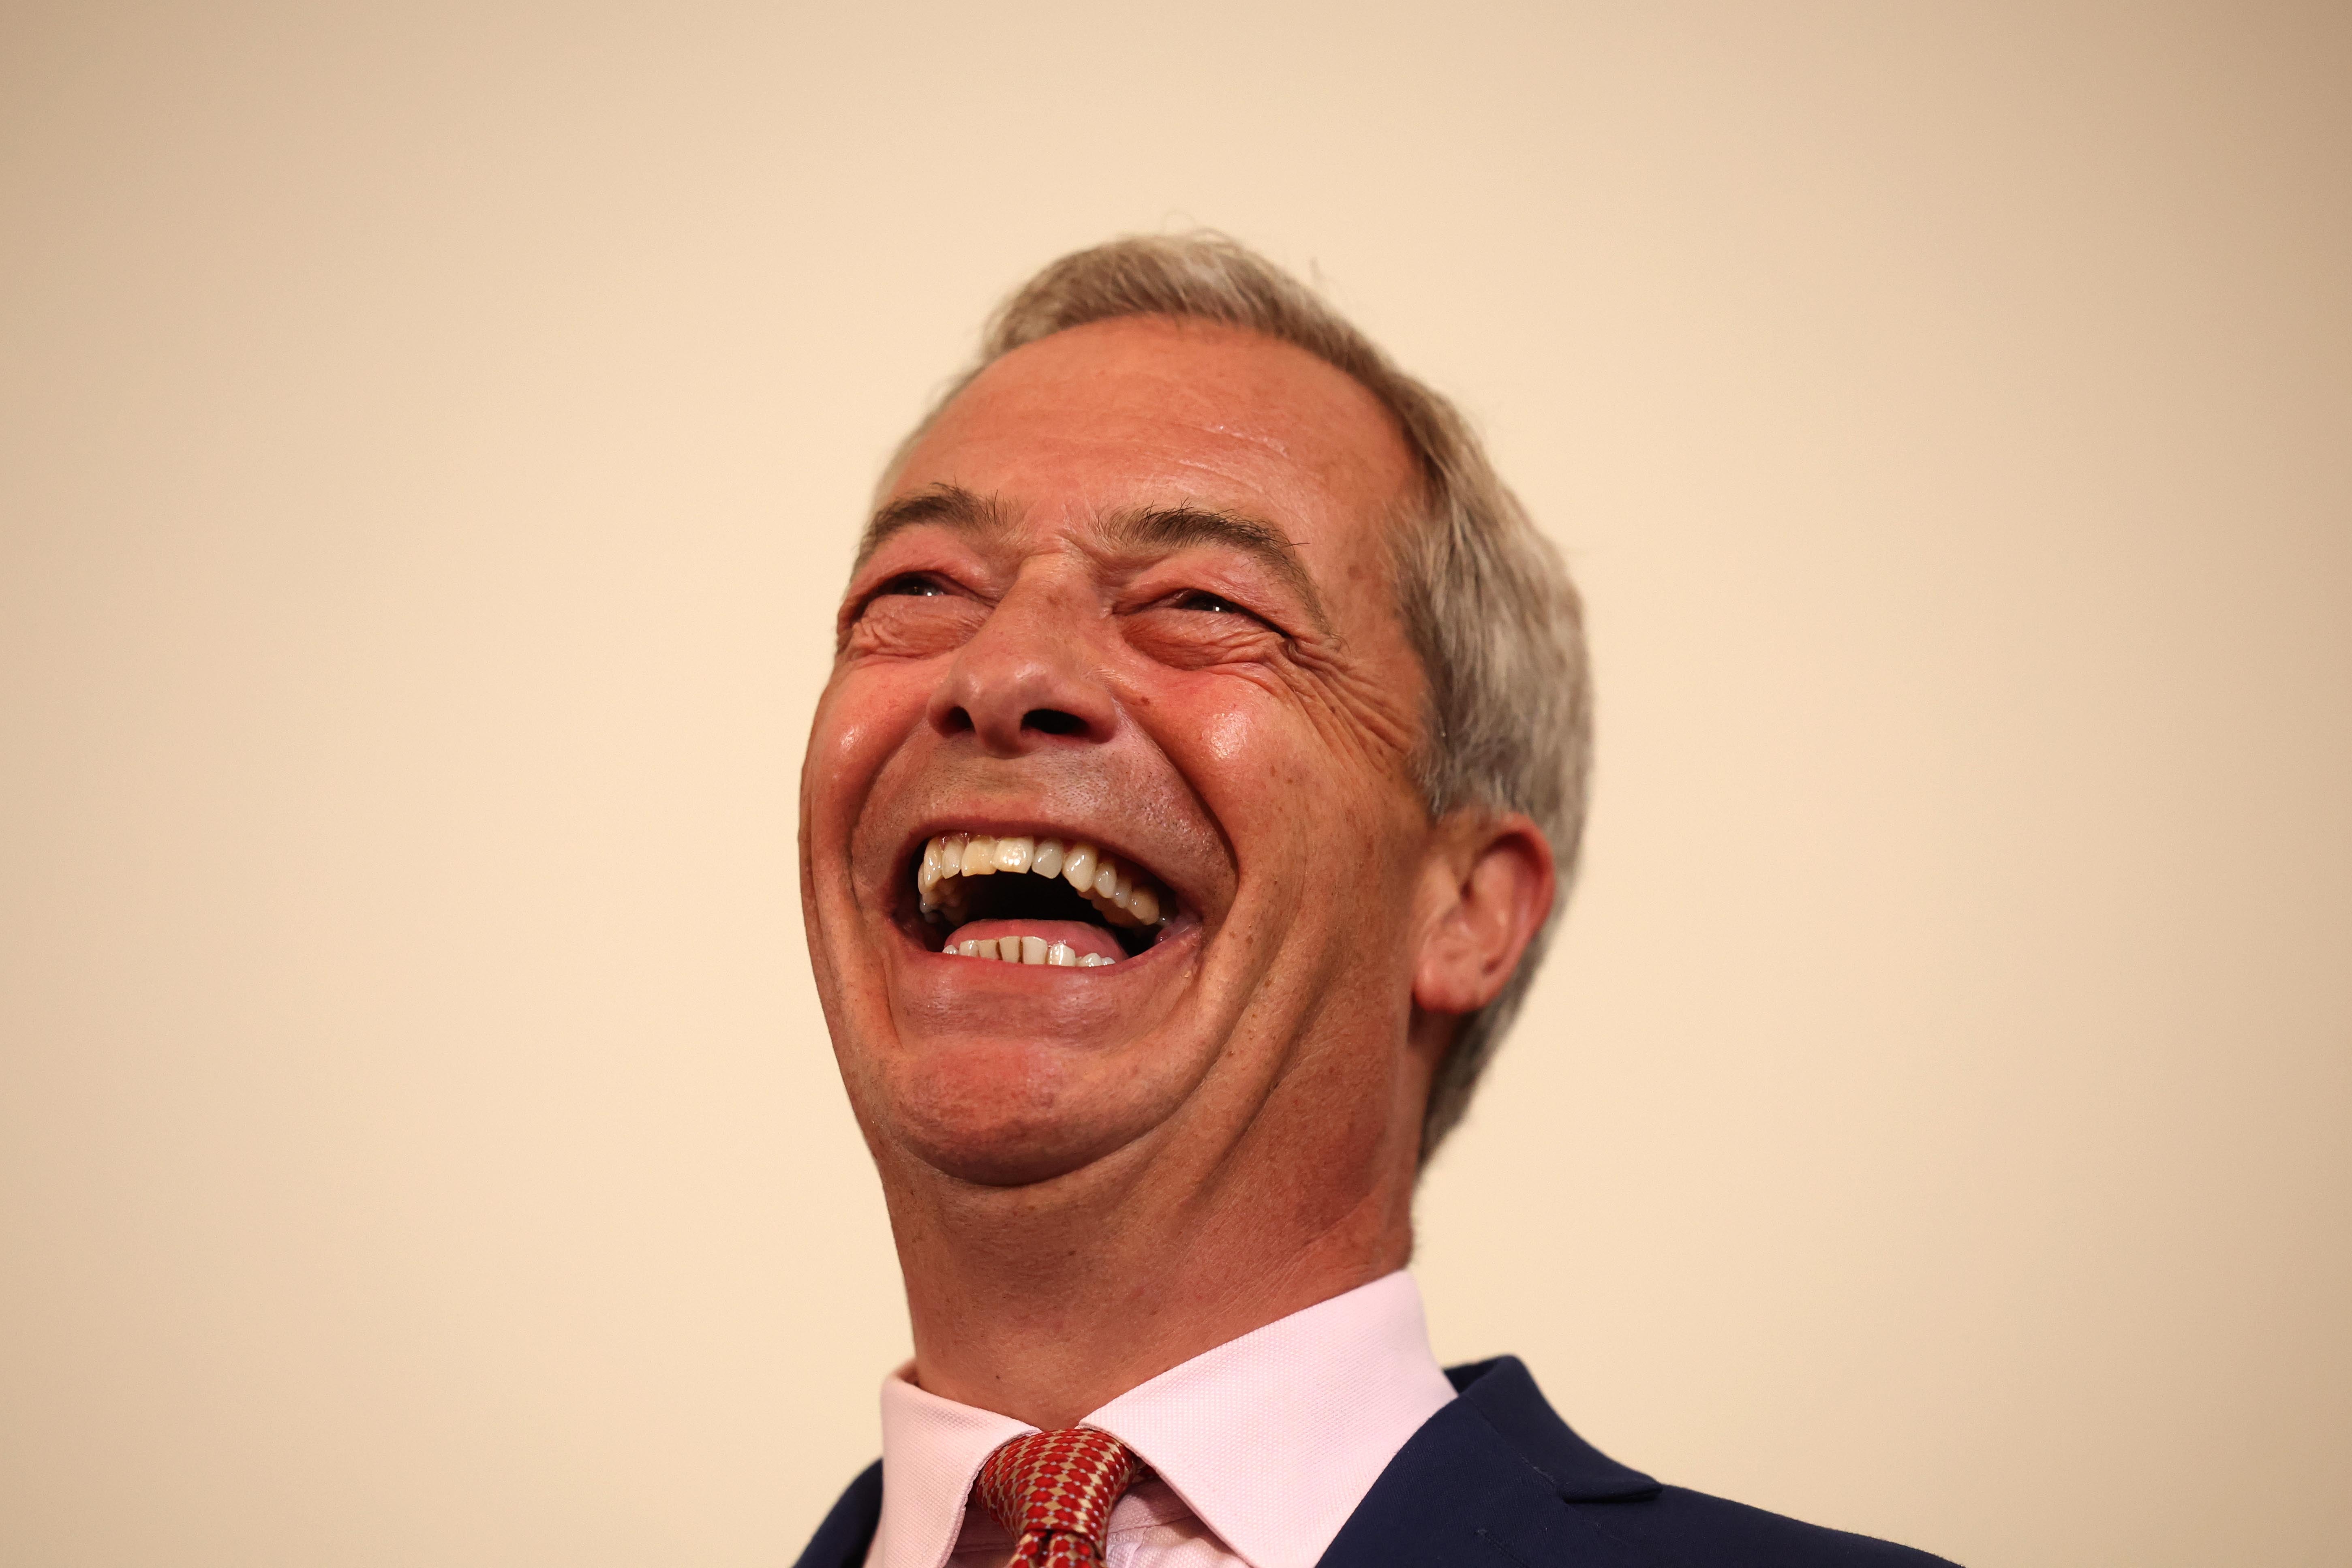 labour, nigel farage, ukip, reform uk, clacton, general election, tory vote collapse so bad labour argue only they can beat farage in clacton